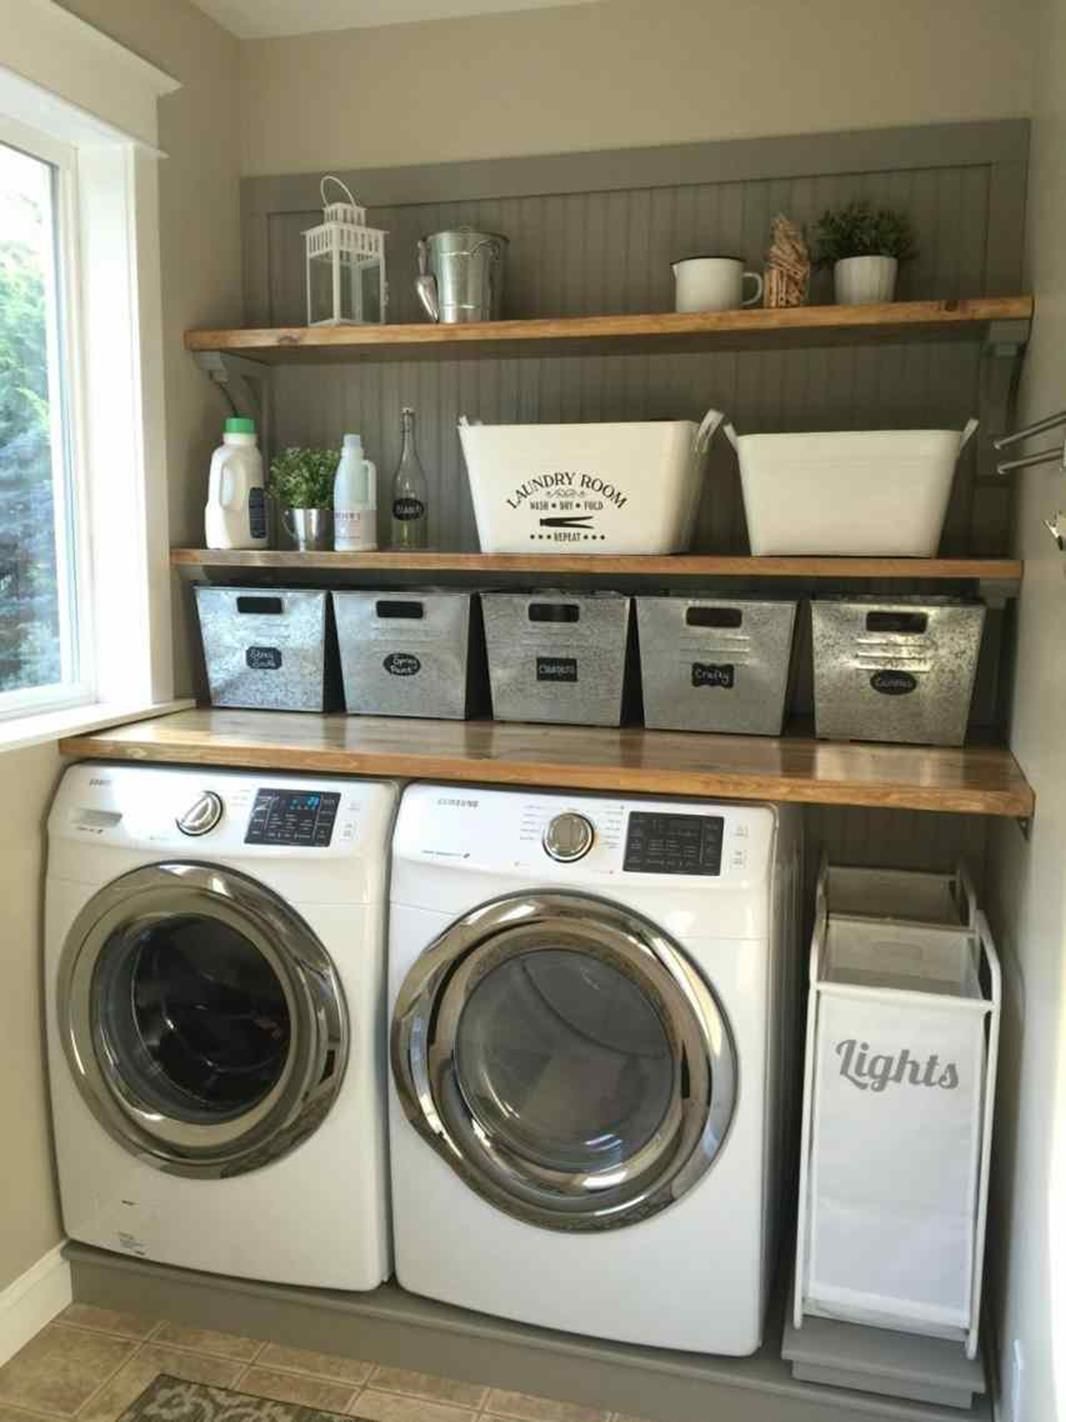 52 Laundry Room Design Ideas that Will Maximize your Small Space – GODIYGO.COM